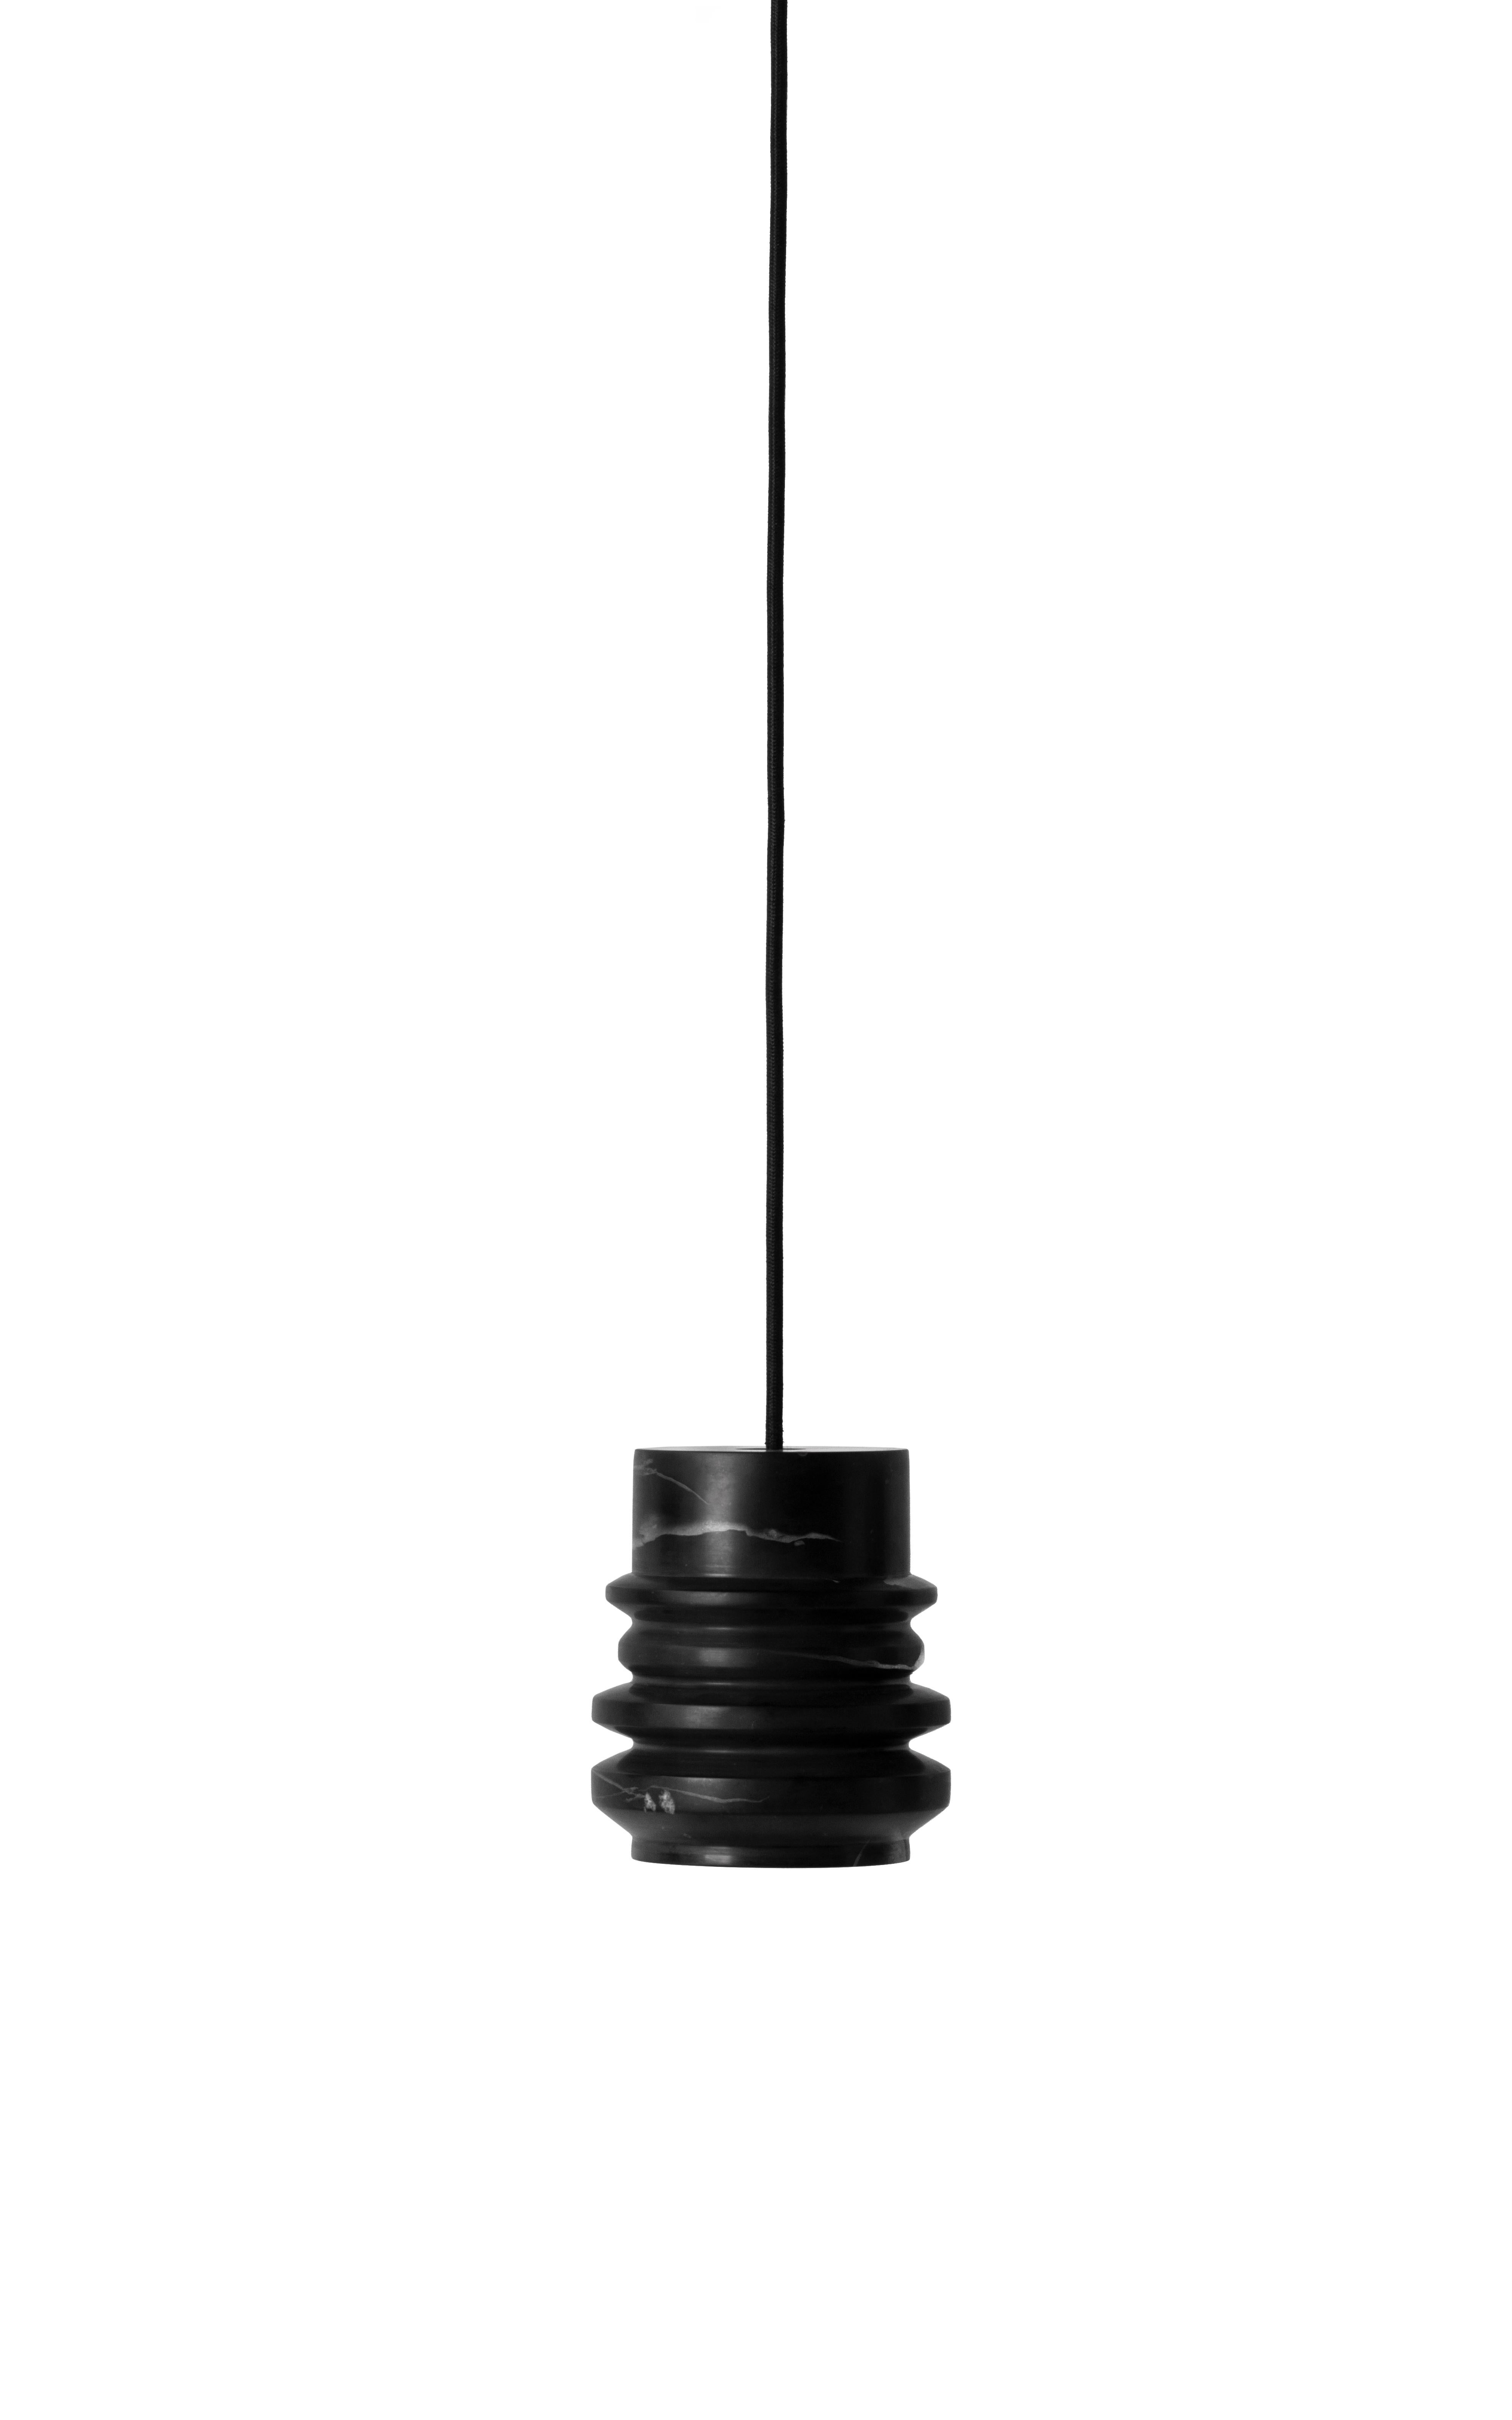 Pendant lamp 'CIRCLE' by Buzao x Bentu design.
Black marble

Measures: 15 cm high, 13 cm diameter
Wire: 2 meters black (adjustable)
Lamp type: E27 LED 3W 100-240V 80Ra 200LM 2700K - Comptable with US electric system.
Ceiling rose 6.5cm diameter